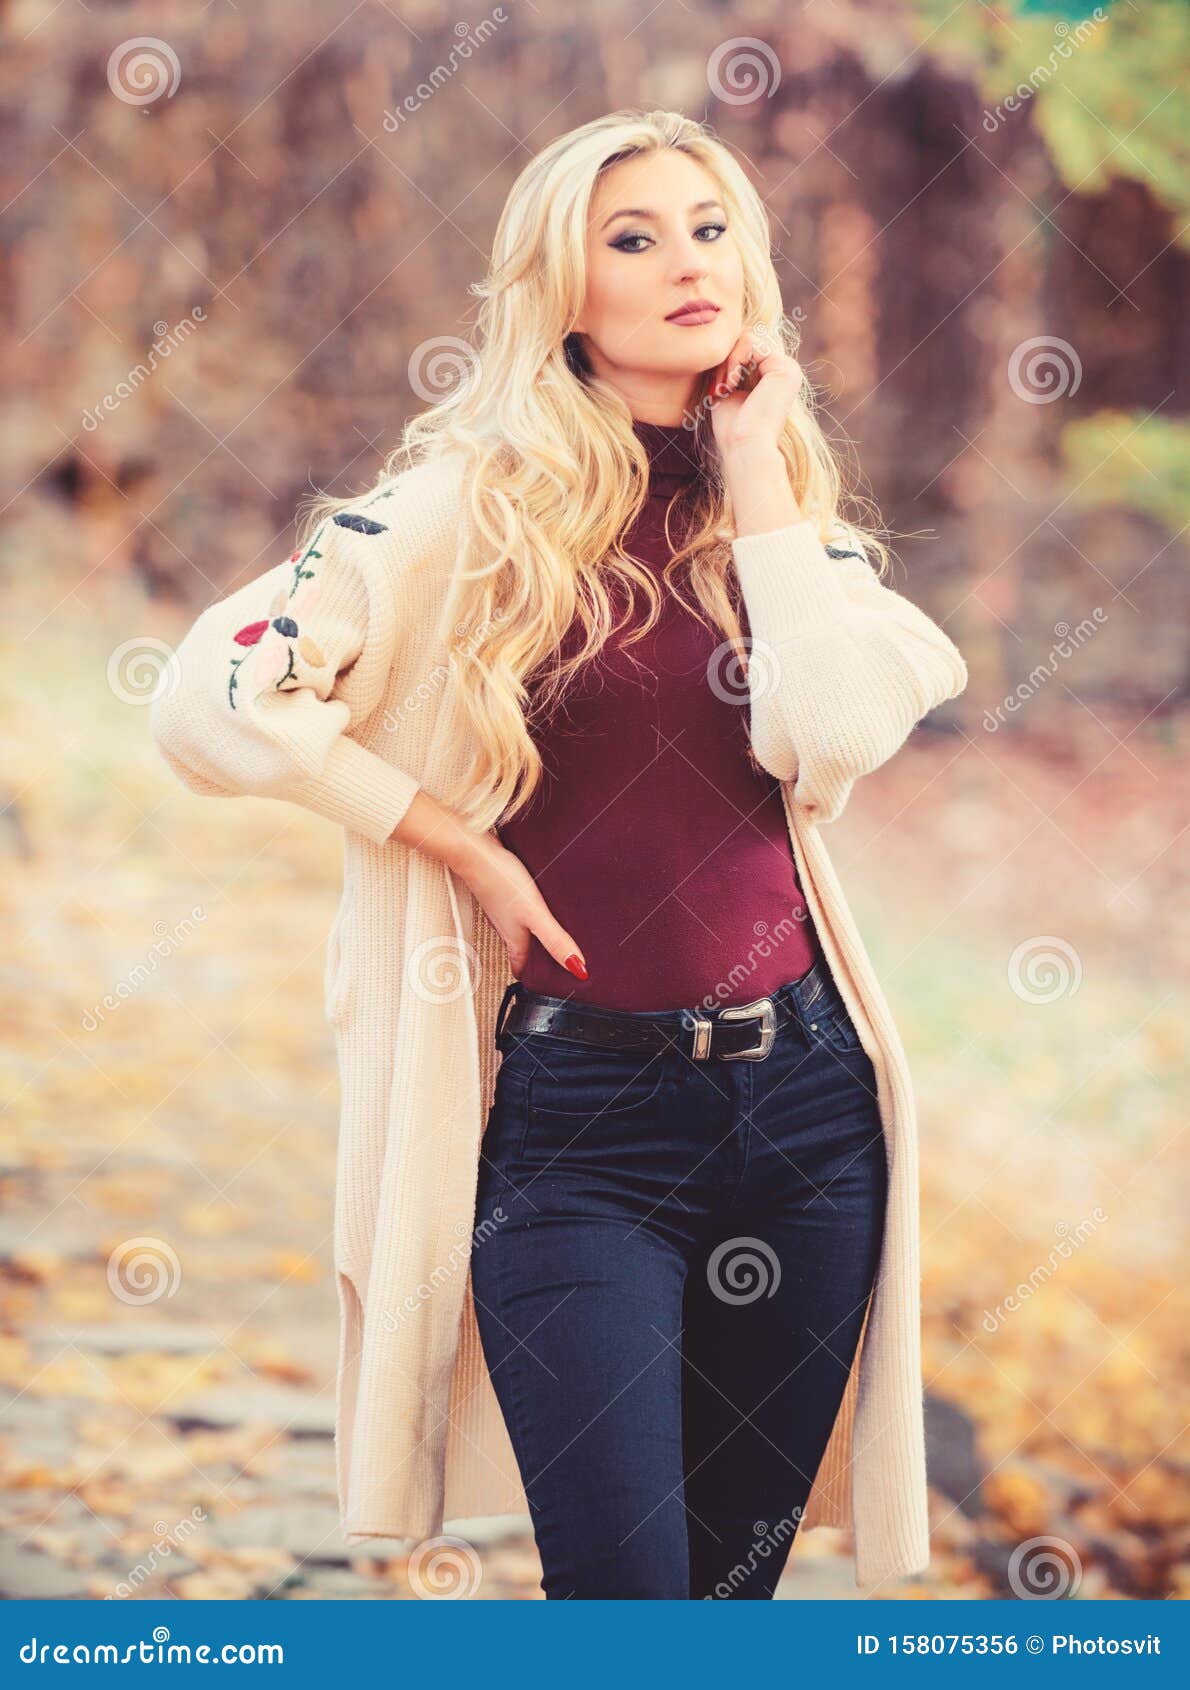 Autumn Hair Care is Important so As To Avoid Dry Frizzy Hair. Long Hair  Care Concept. Cold Blonde Concept Stock Photo - Image of conditioner,  adorable: 158075356